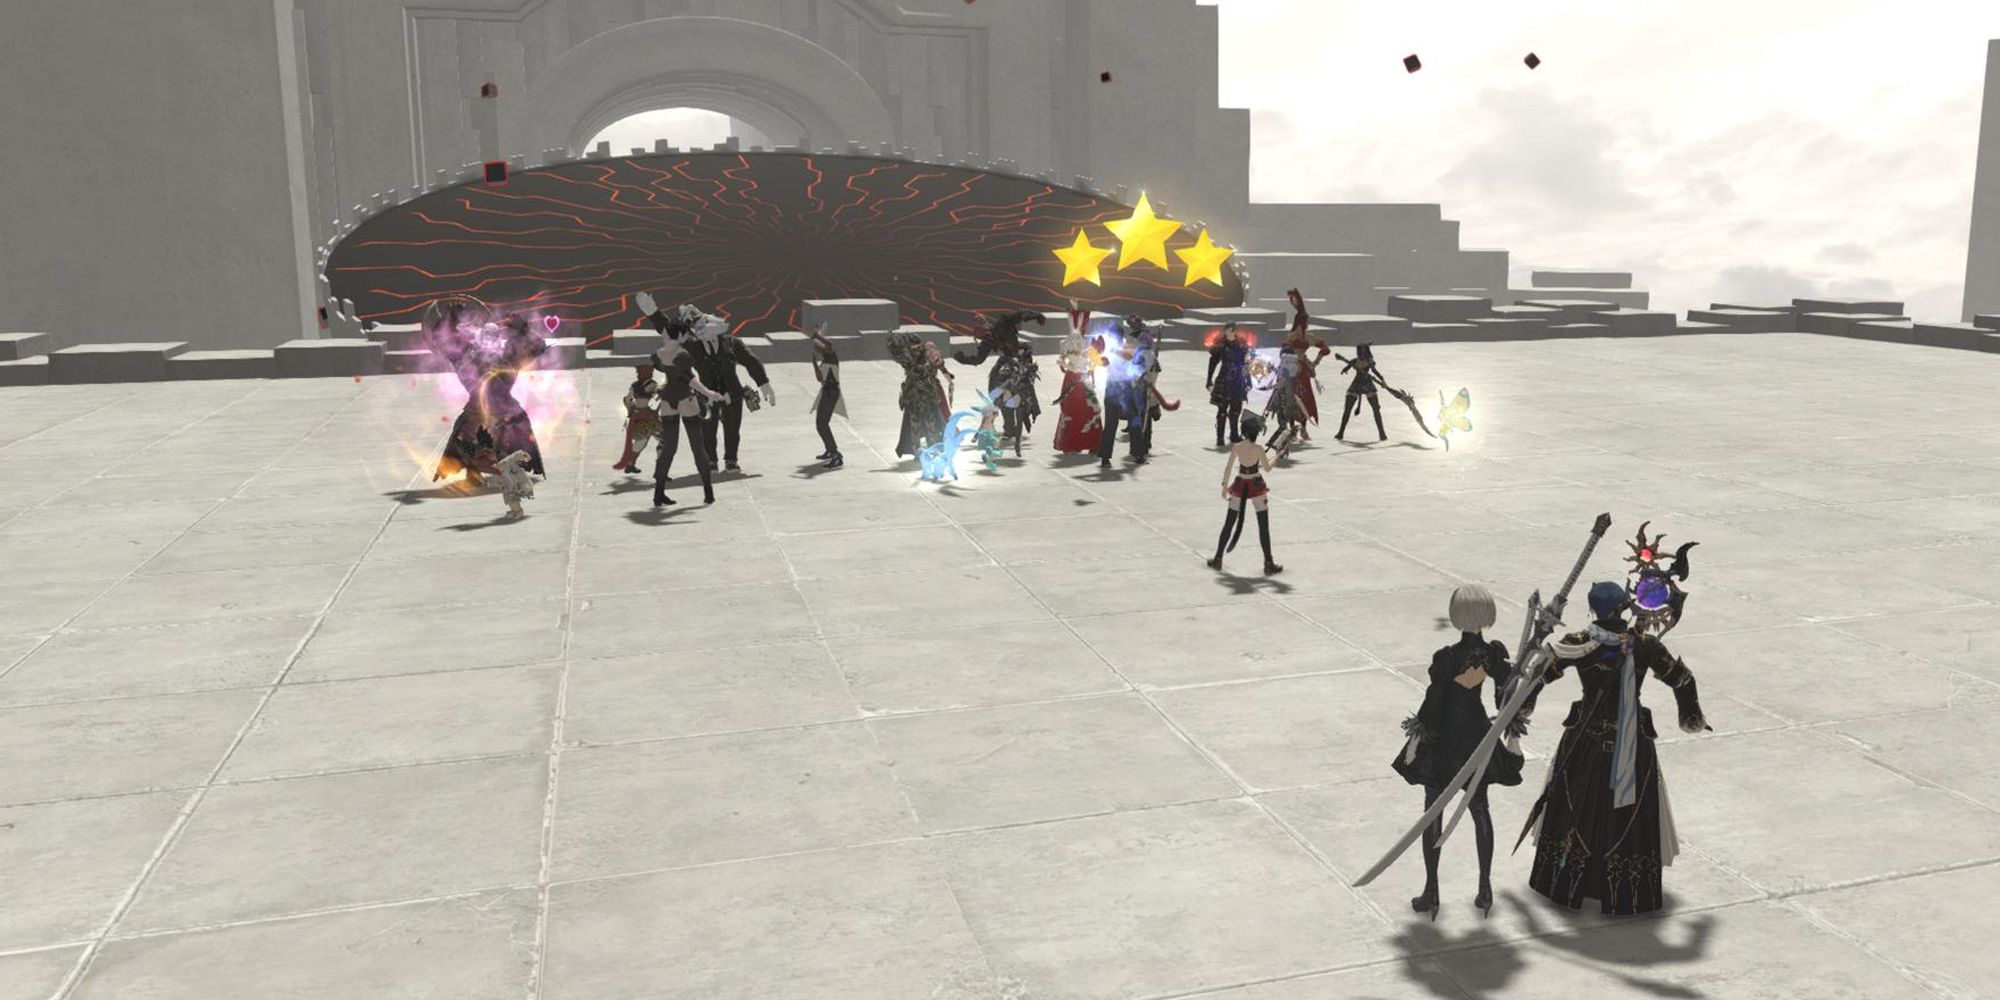 Final Fantasy 14 crowd standing on an empty grey platform with one player having three stars above their head